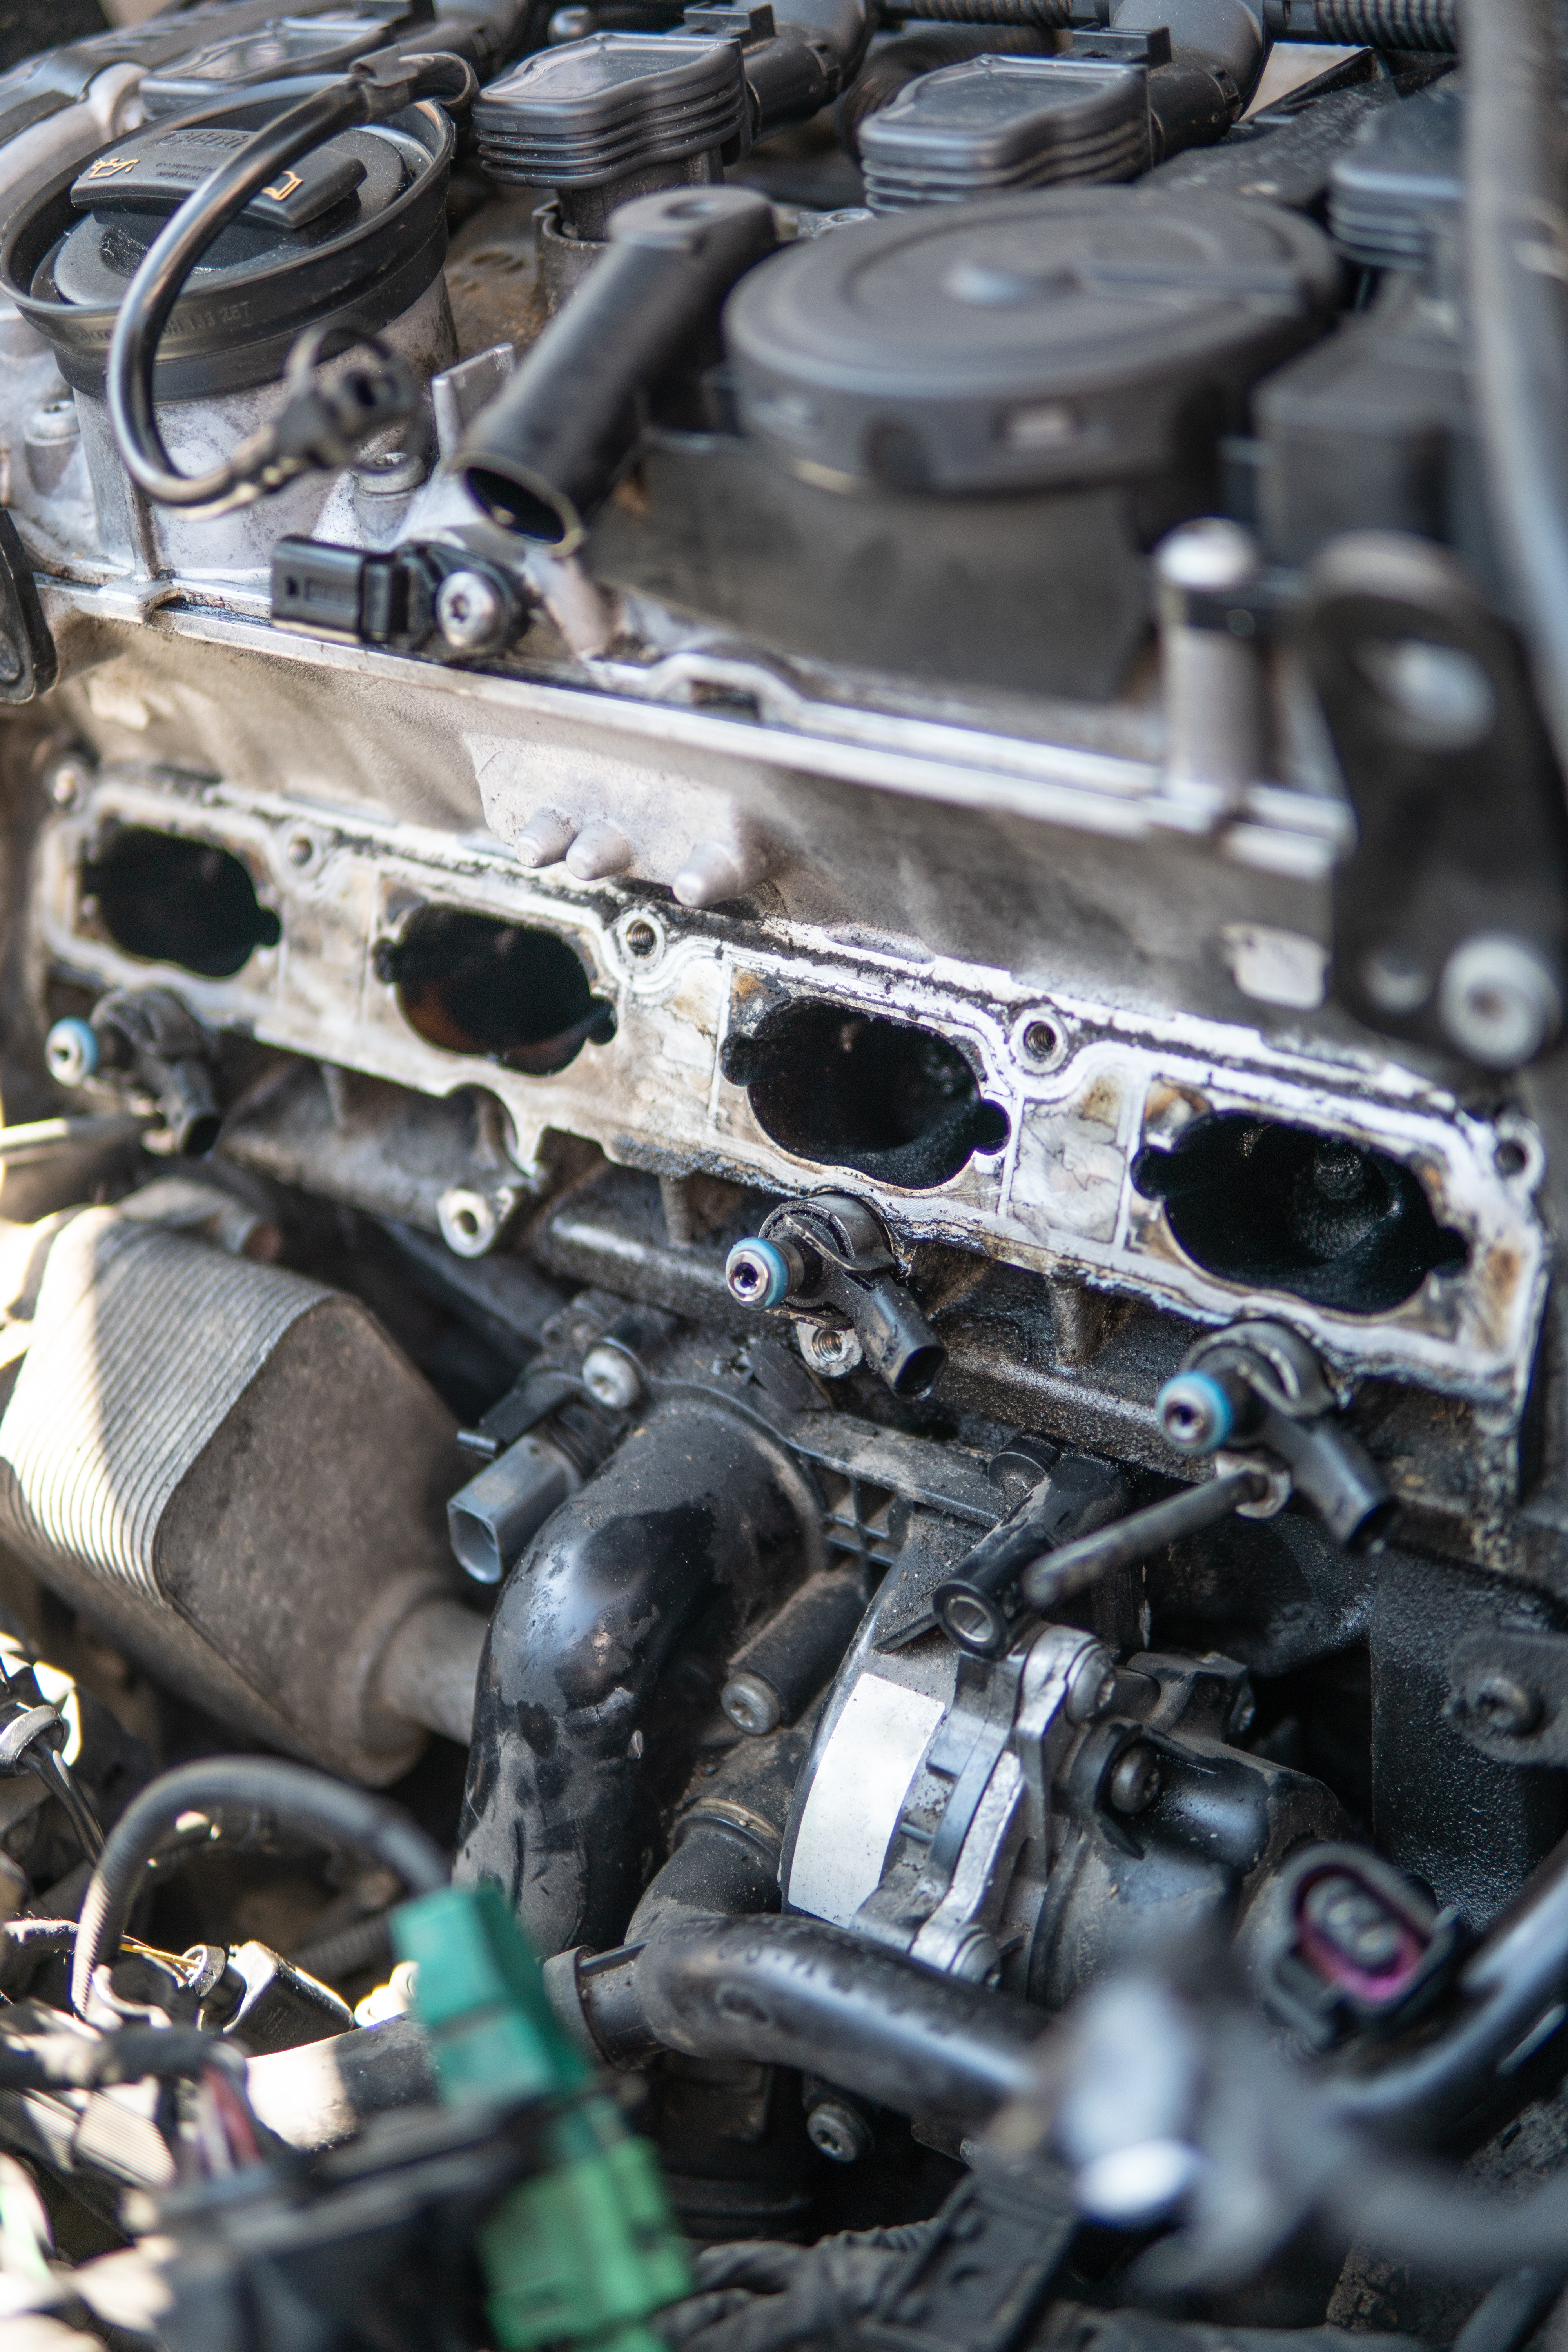 An image of a dirty intake manifold but DPF Alternatives can help with our expert intake manifold cleaning service in Canyon, TX.